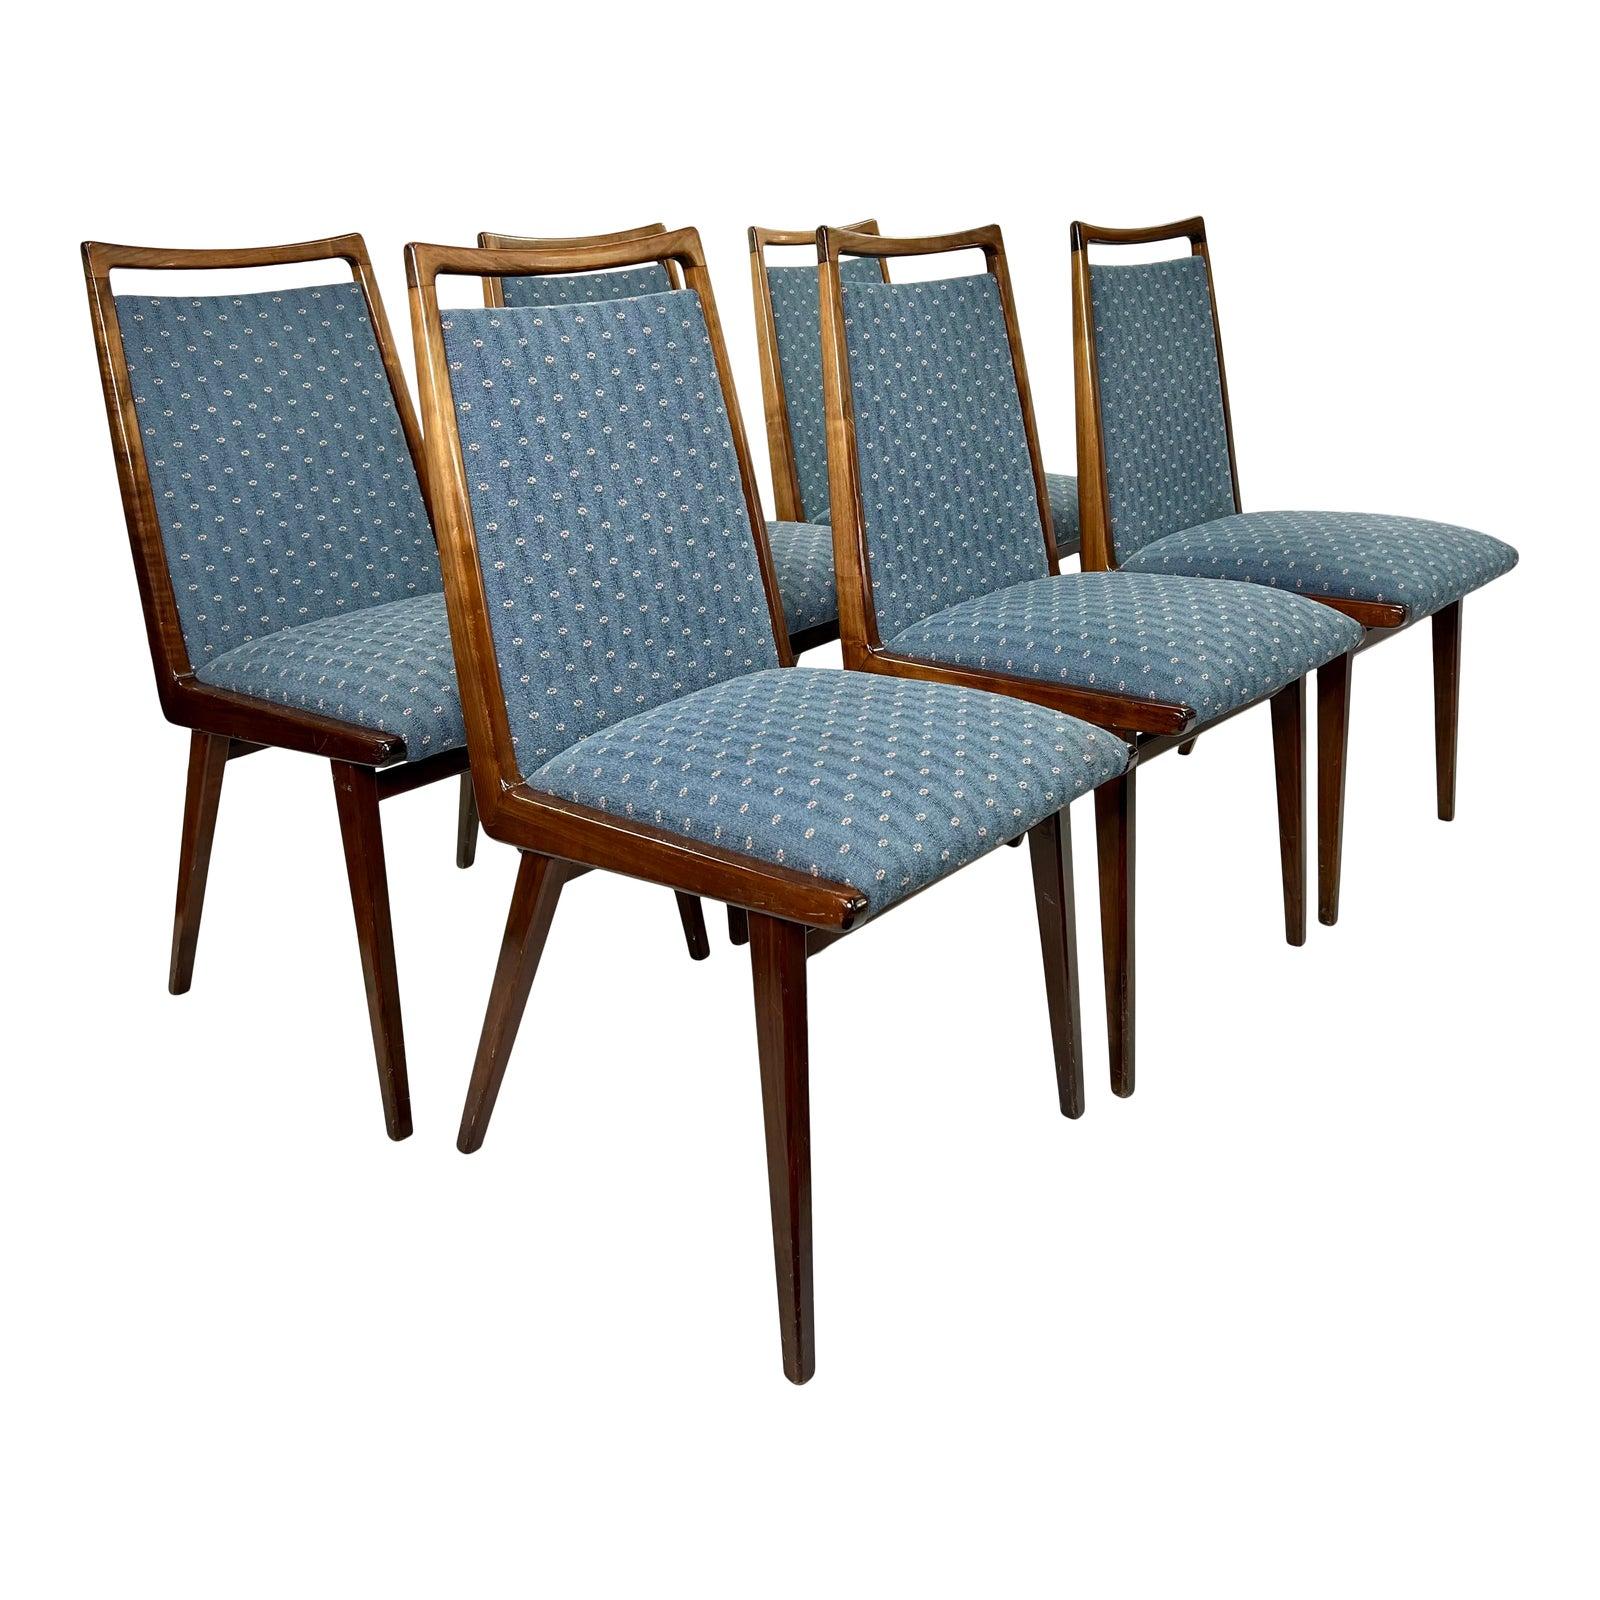 Mid century dining chairs made in Germany by Casala.